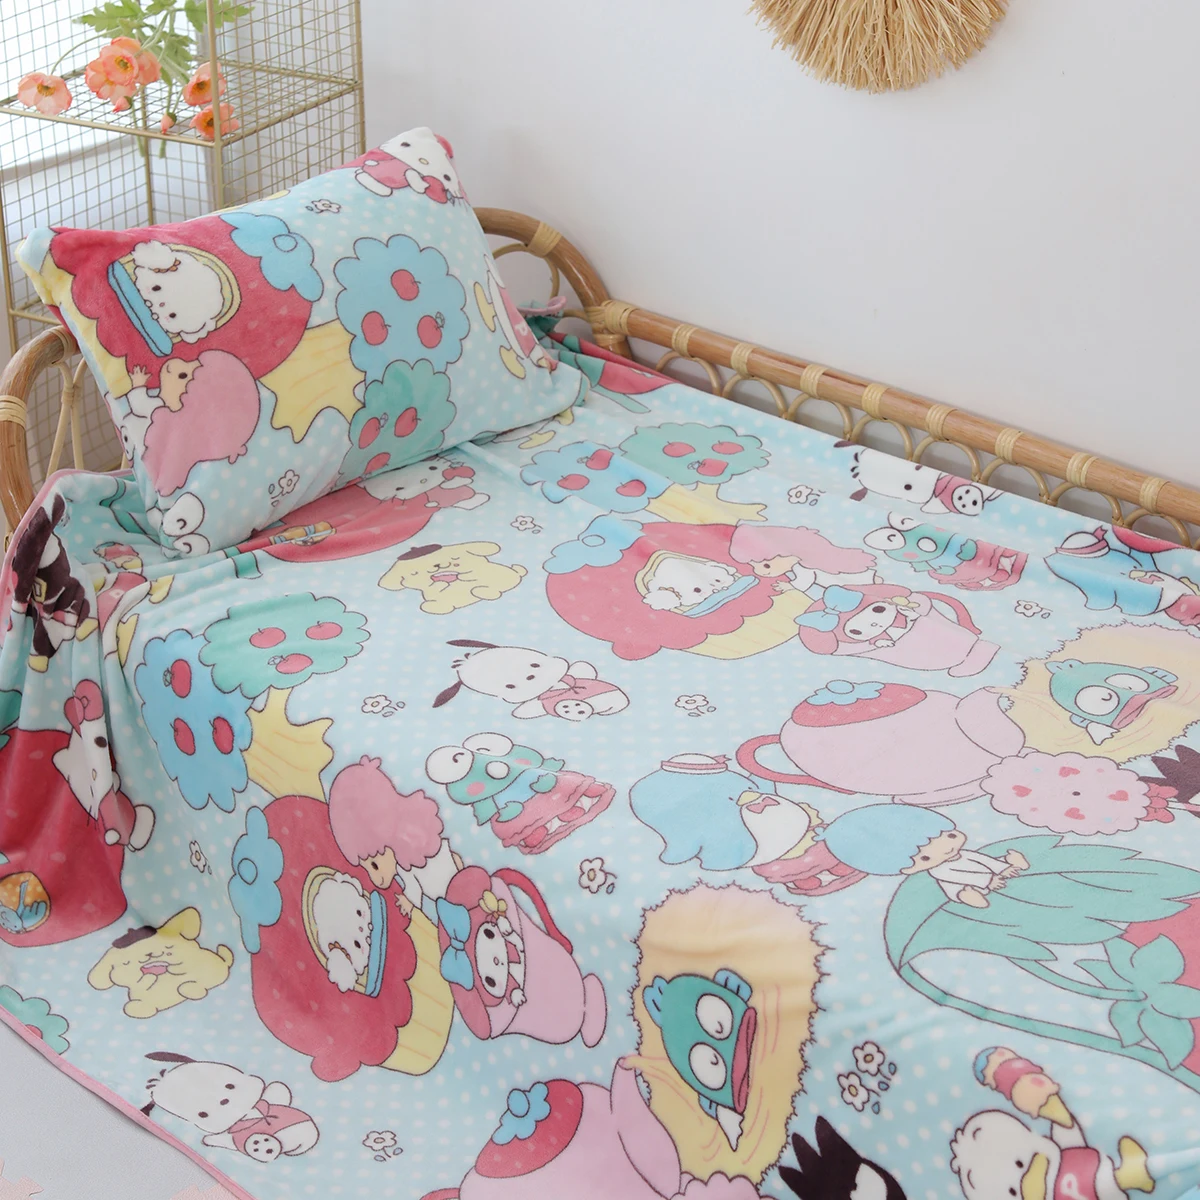 Kawaii Melody Plush Blanket Anime Flannel Pillowcase Lovely Sanrio Series Room Decor Nap Air Conditioner QuiltFine Gift For Girl images - 6